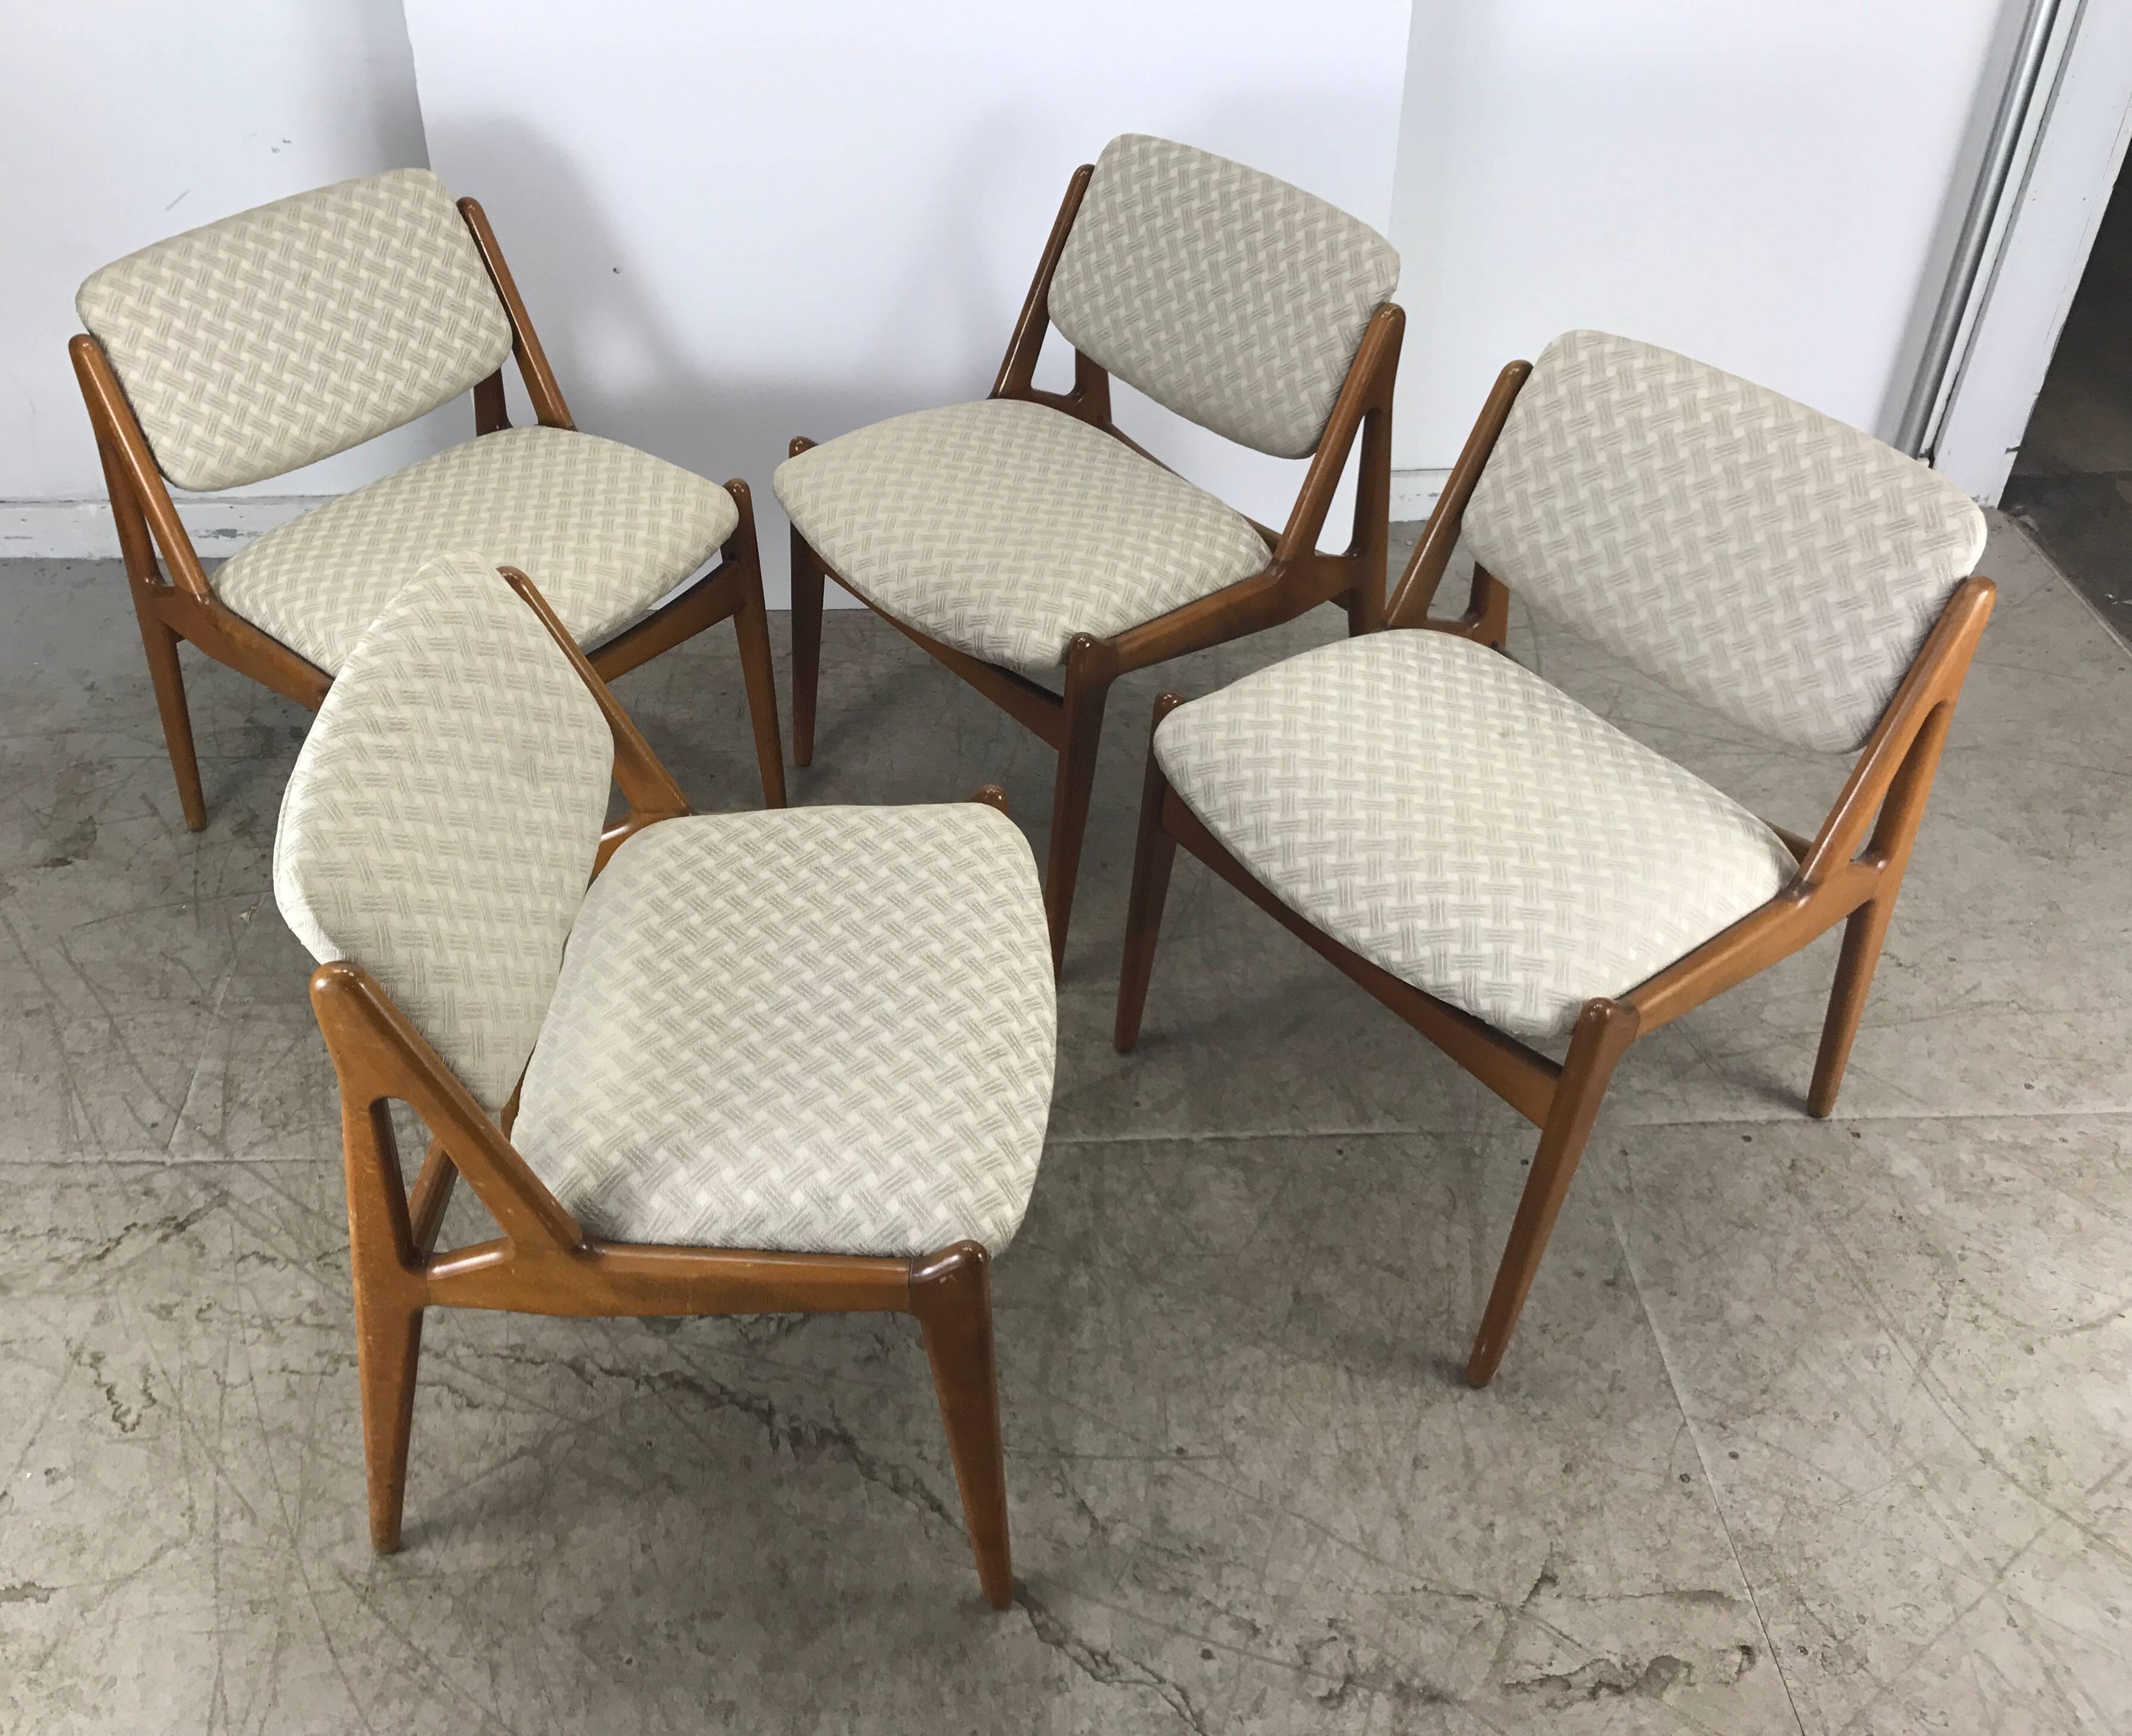 A set of four Danish Mid-Century Modern teak dining chairs by Arne Vodder for Vamo Sonderborg, solid sculptural teak frames with swivel backs for extra comfort, Hand delivery avail to New York City or anywhere enroute from Buffalo New York.